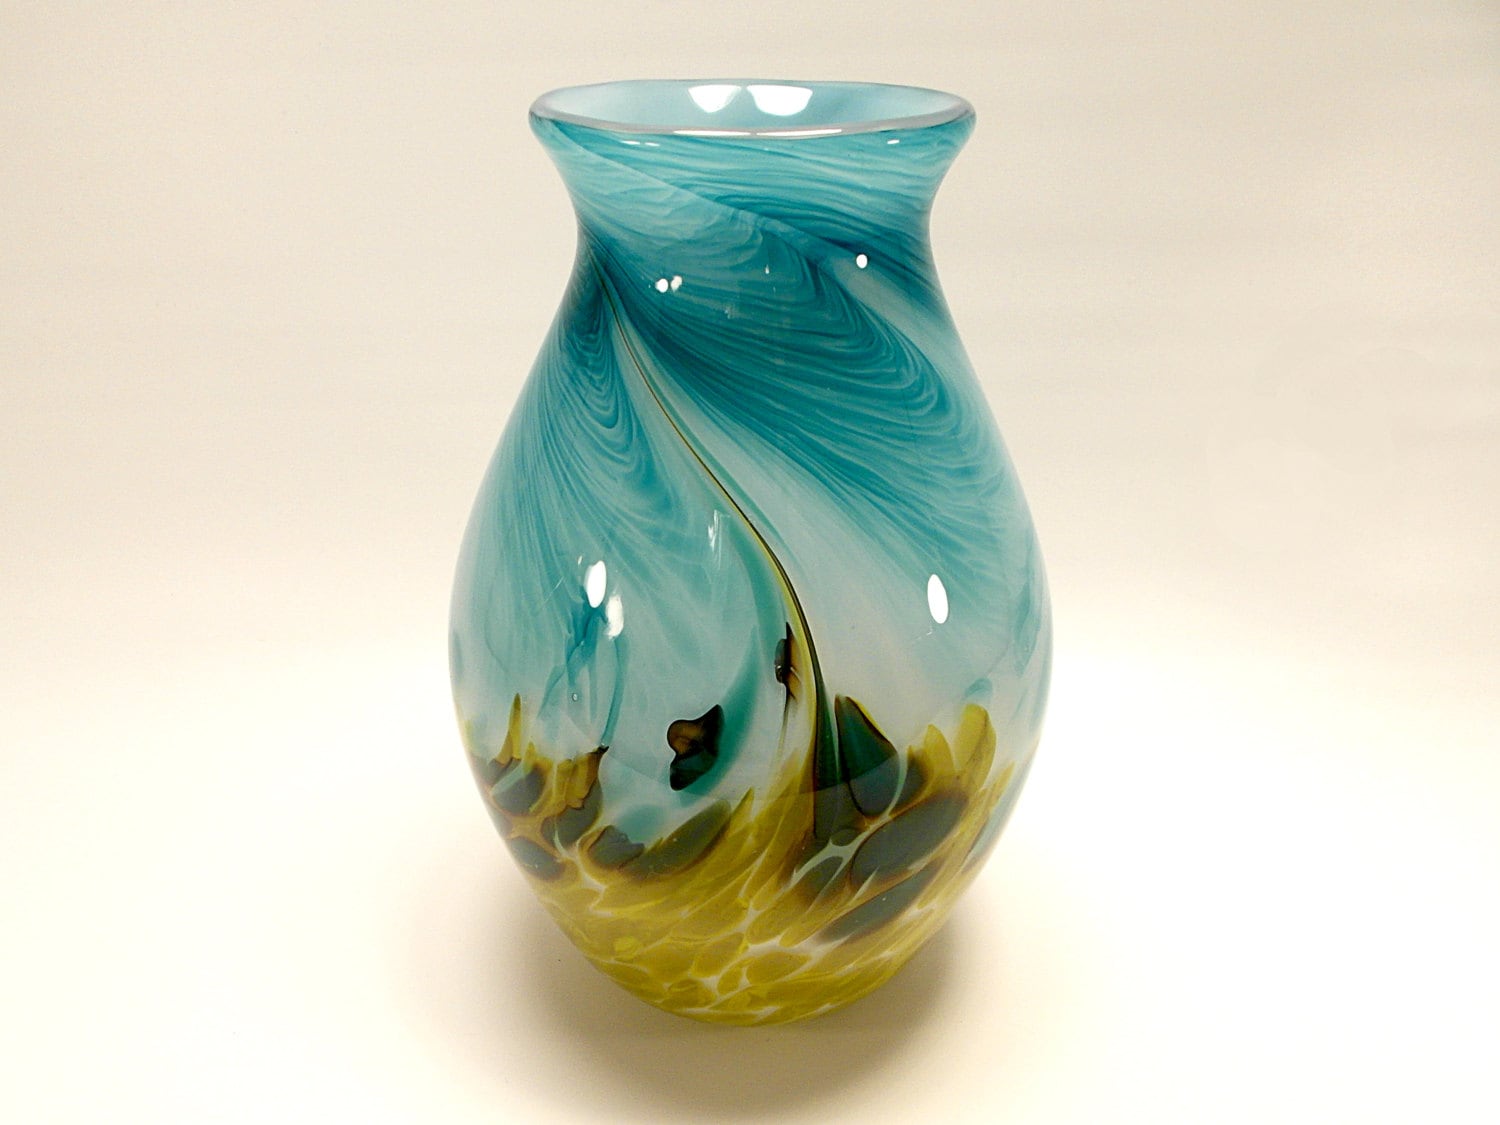 Hand Blown Art Glass Vase In Bright Teal Blue And Olive Green